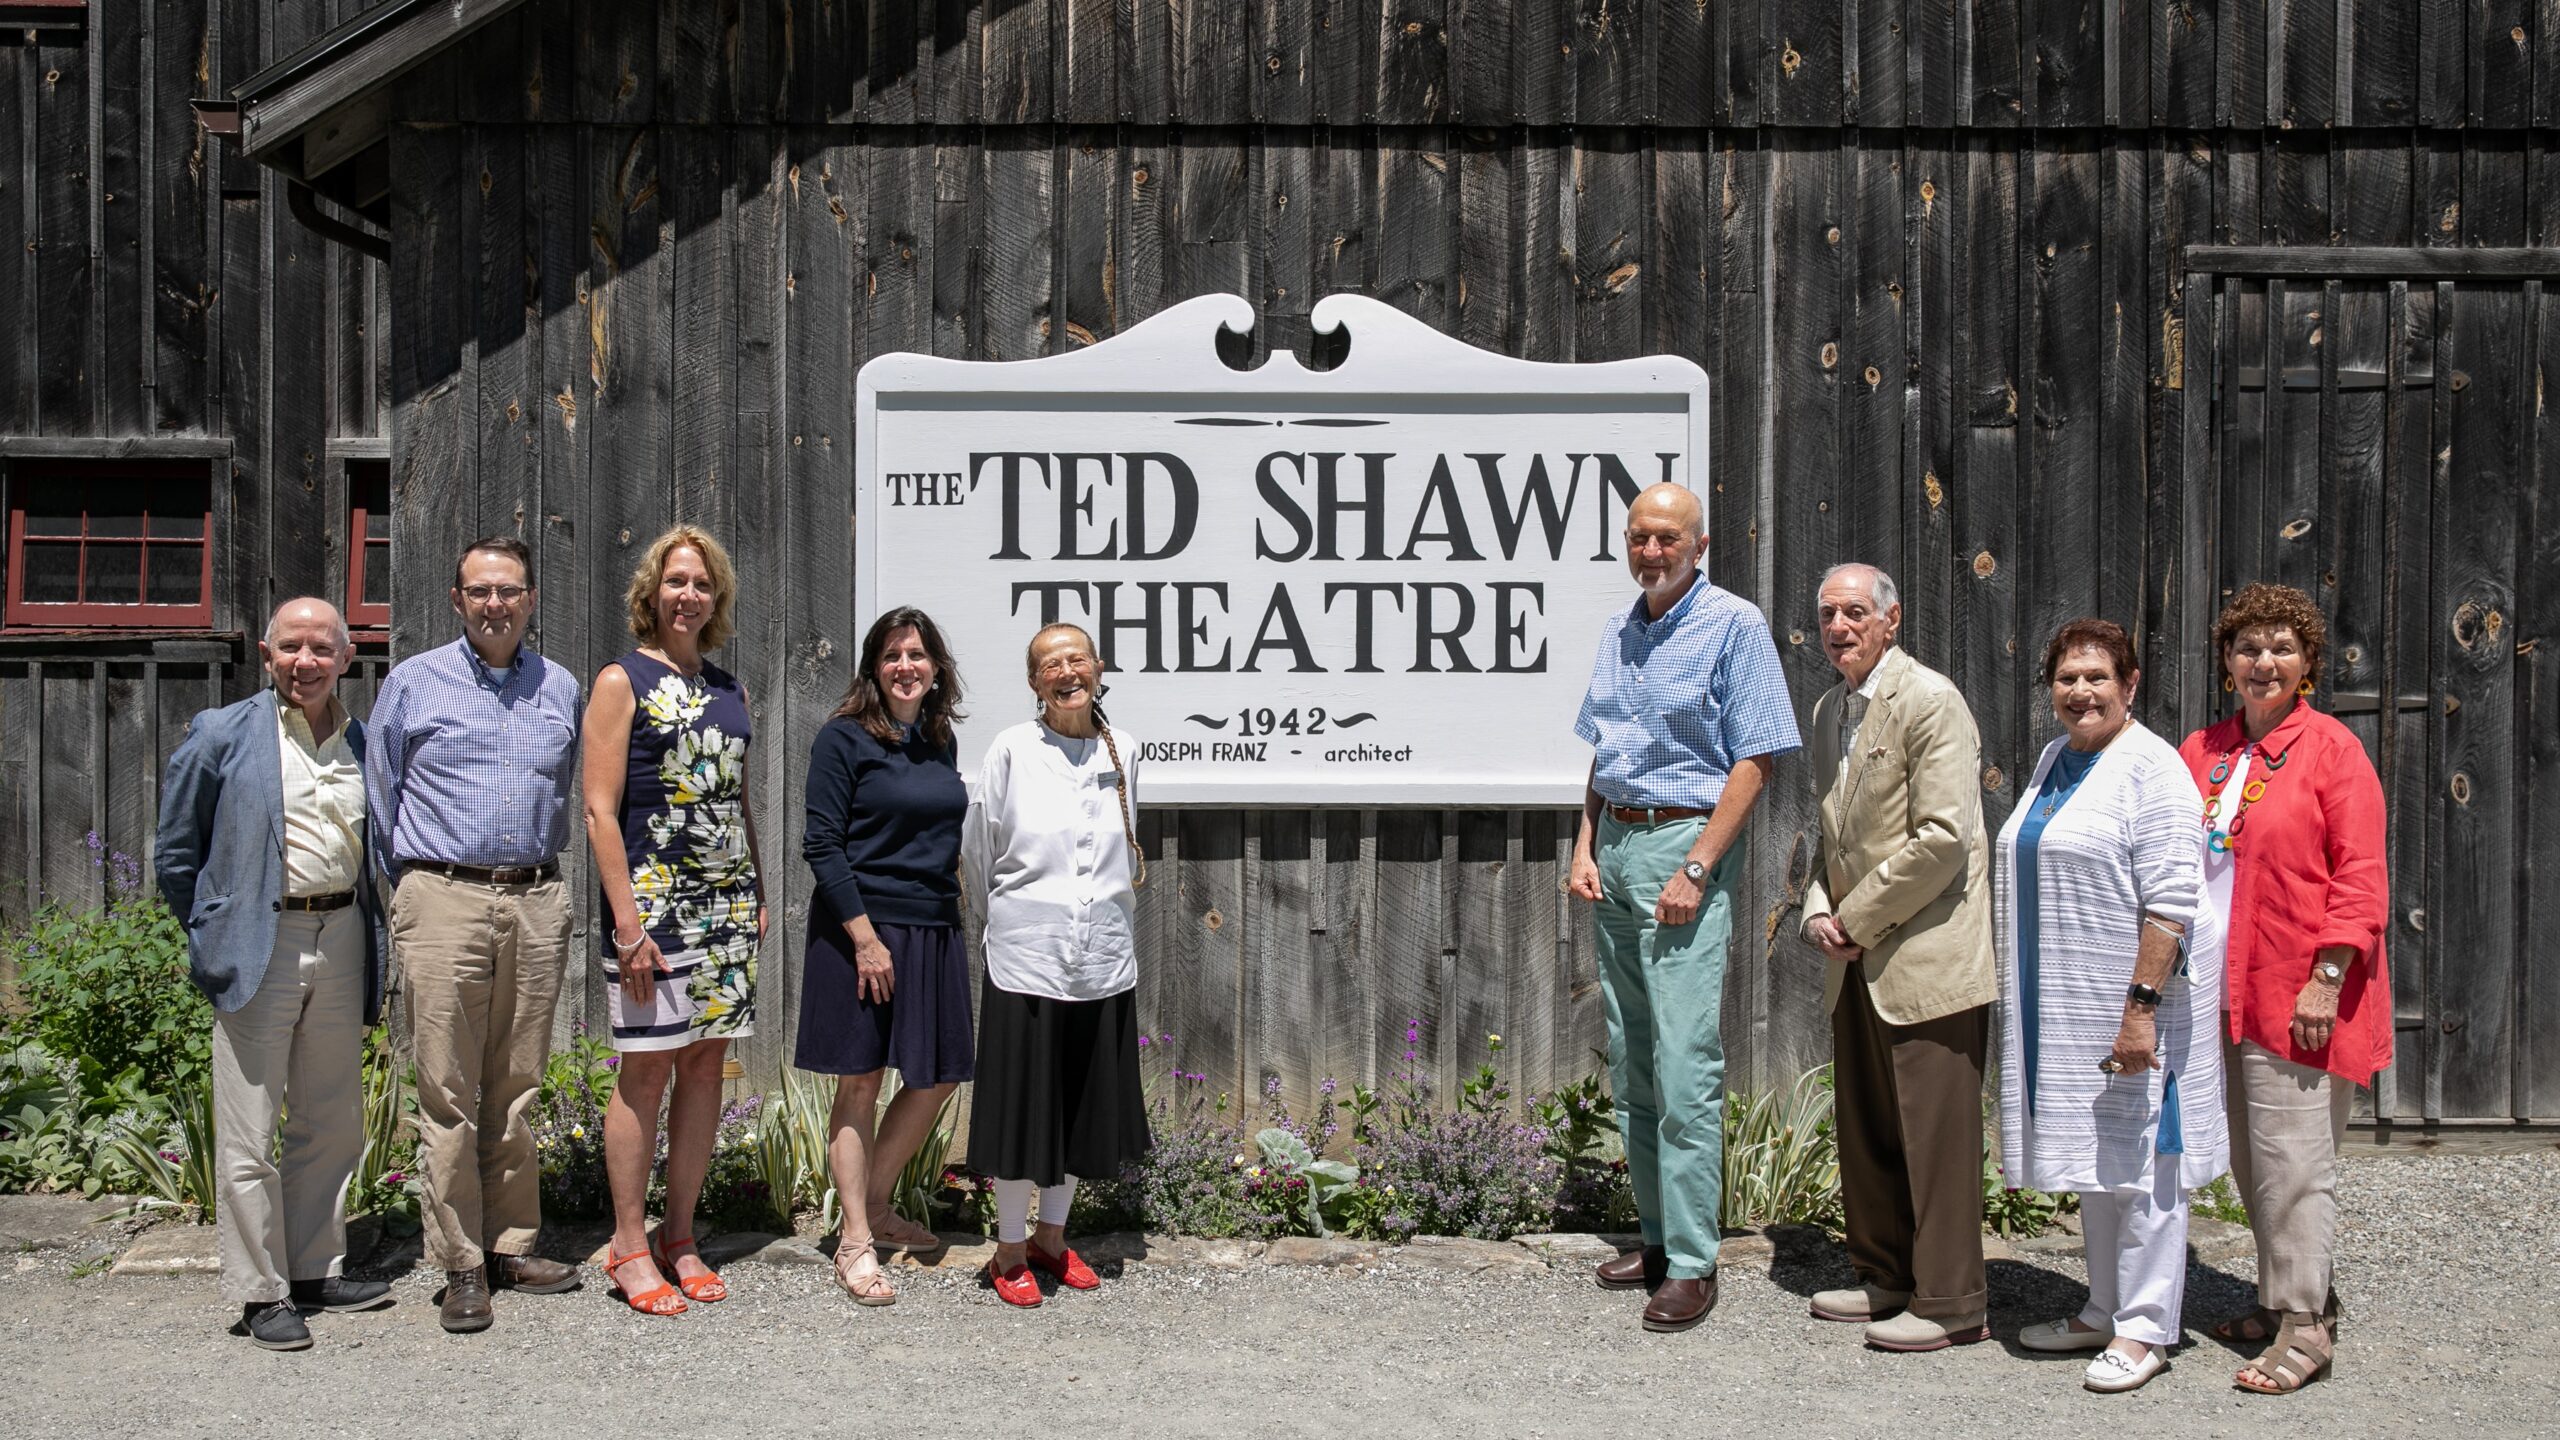 A group of Members and Jacob's Pillow staff stand on either side of the Ted Shawn Theatre sign.